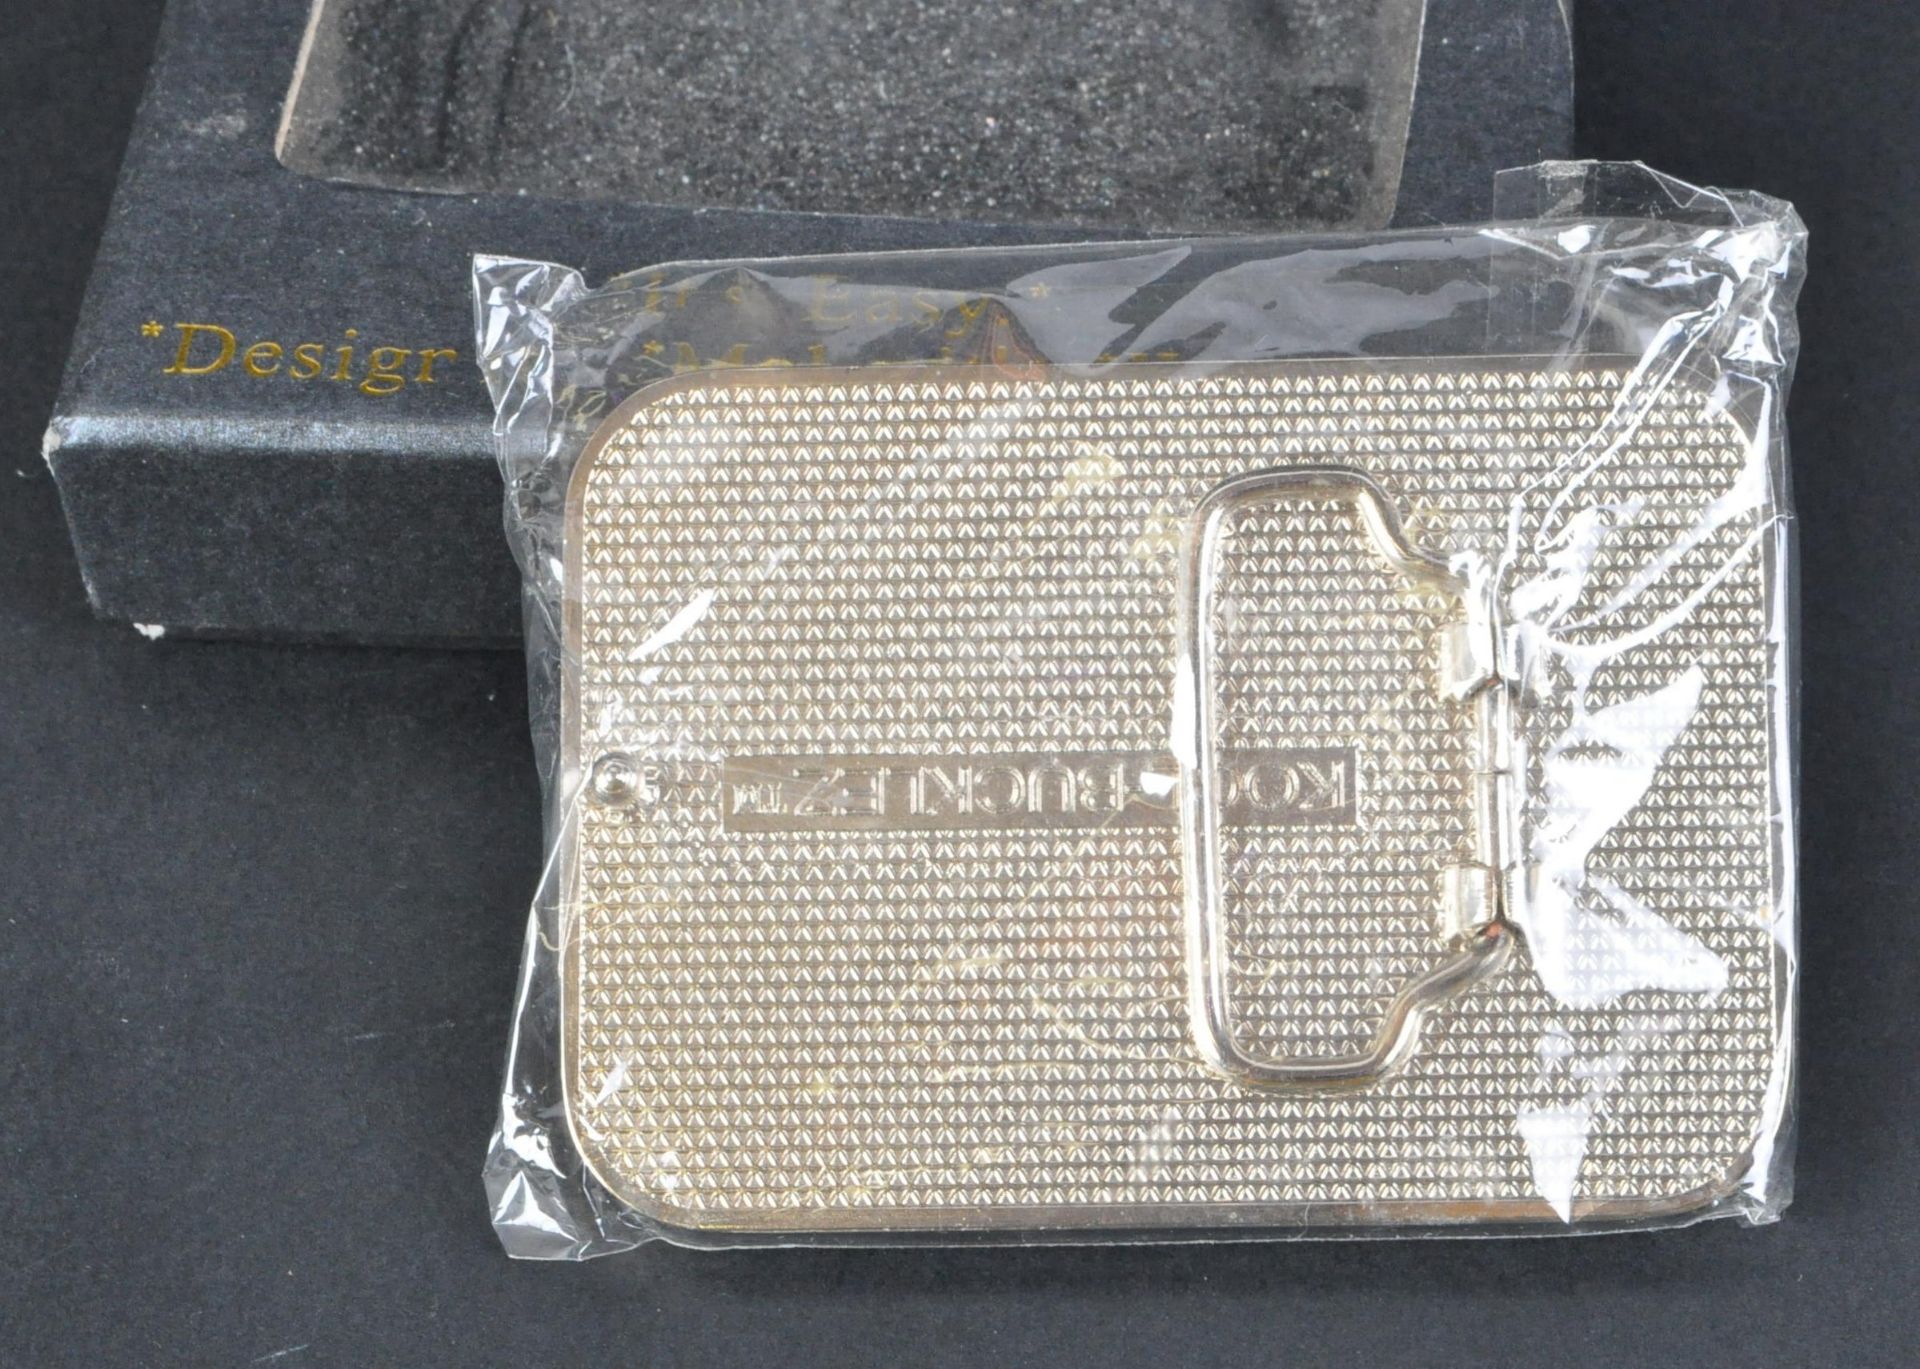 ESTATE OF DAVE PROWSE - FAN GIFT PICTURE BELT BUCKLE - Image 3 of 4